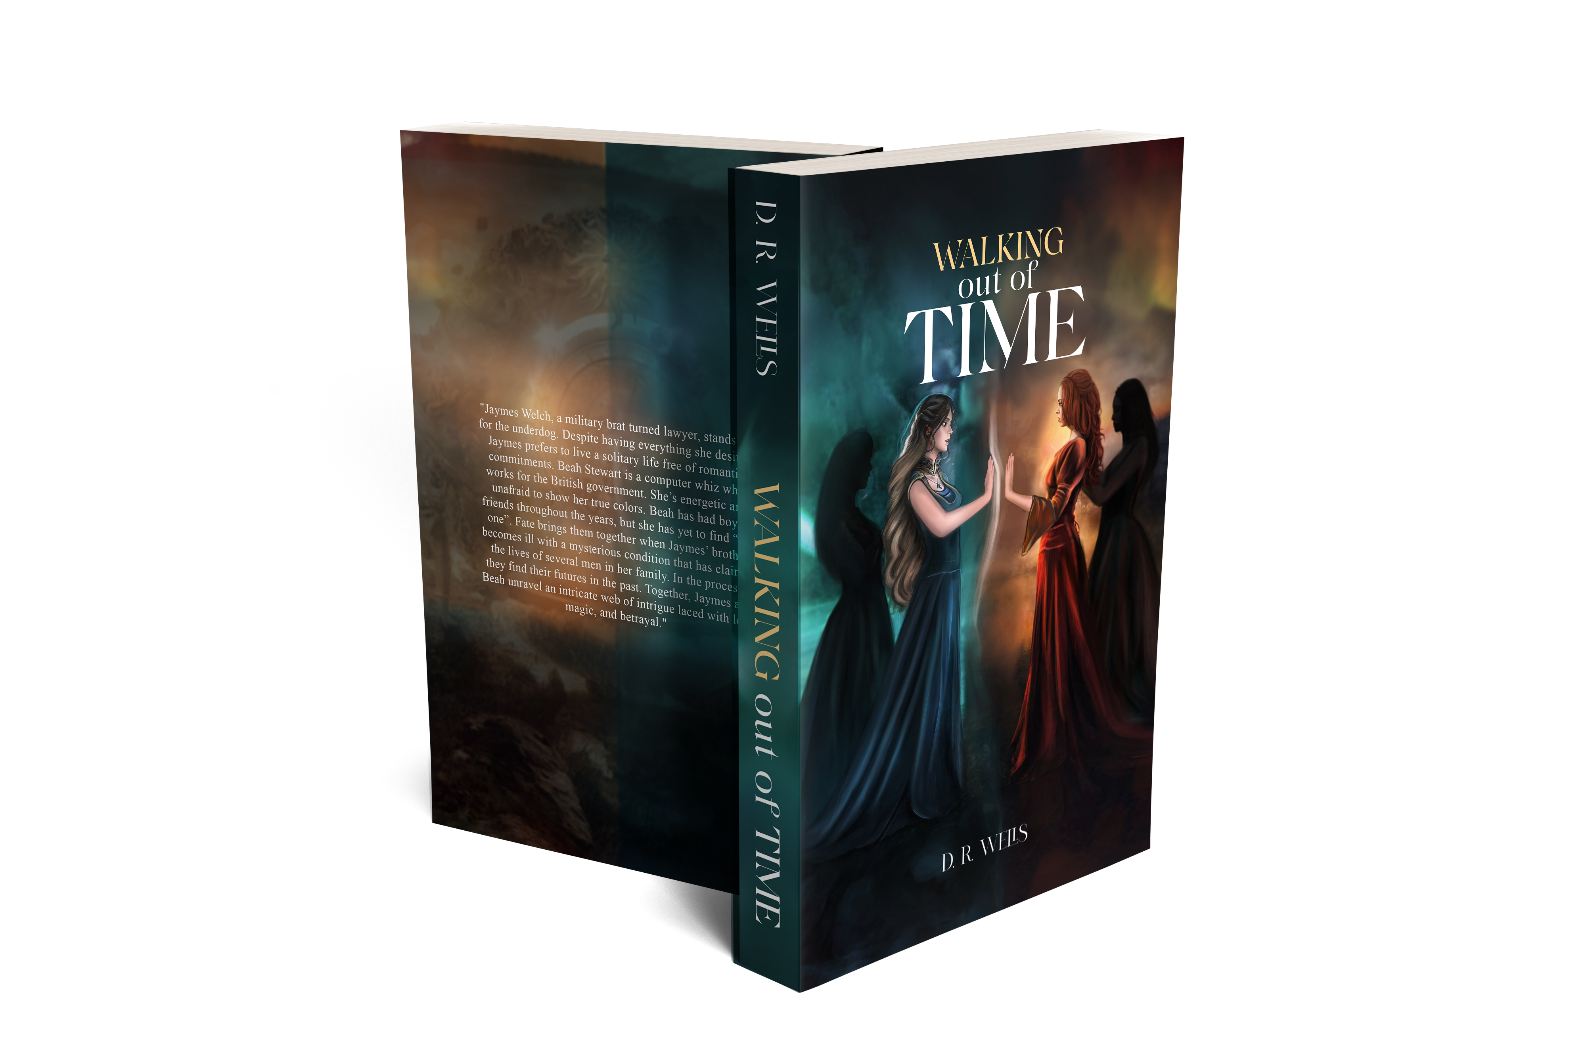 David R. Wells Releases His Debut Novel ‘Walking Out of Time’ 2